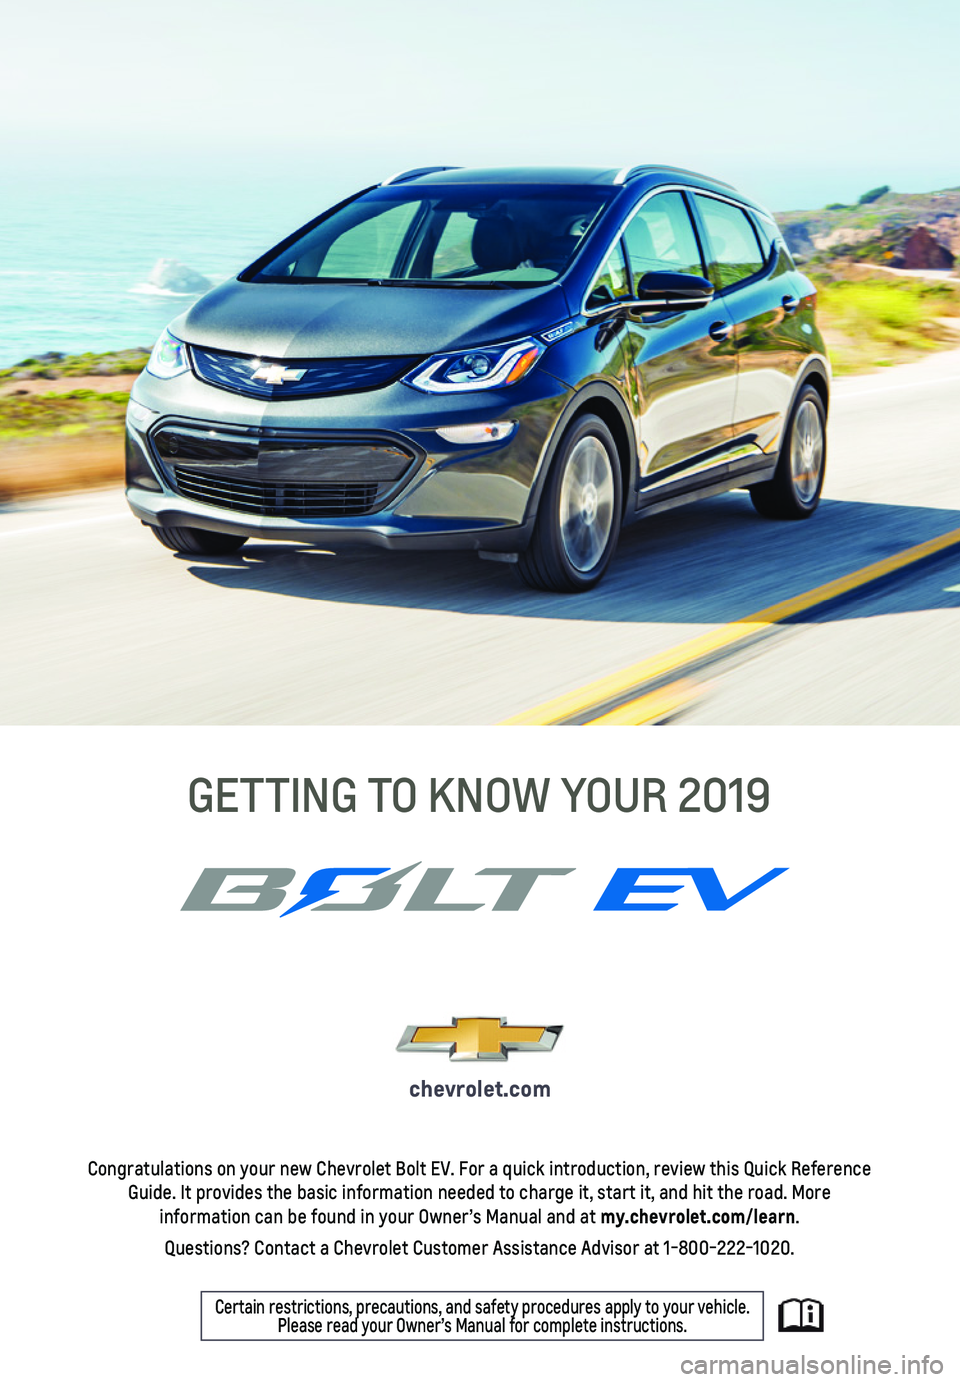 CHEVROLET BOLT EV 2019  Get To Know Guide 1
Pantone Spot Colors
Pantone300 C
Pantone
Cool
Gray 7C
Congratulations on your new Chevrolet Bolt EV. For a quick introduction,\
 review this Quick Reference Guide. It provides the basic information 